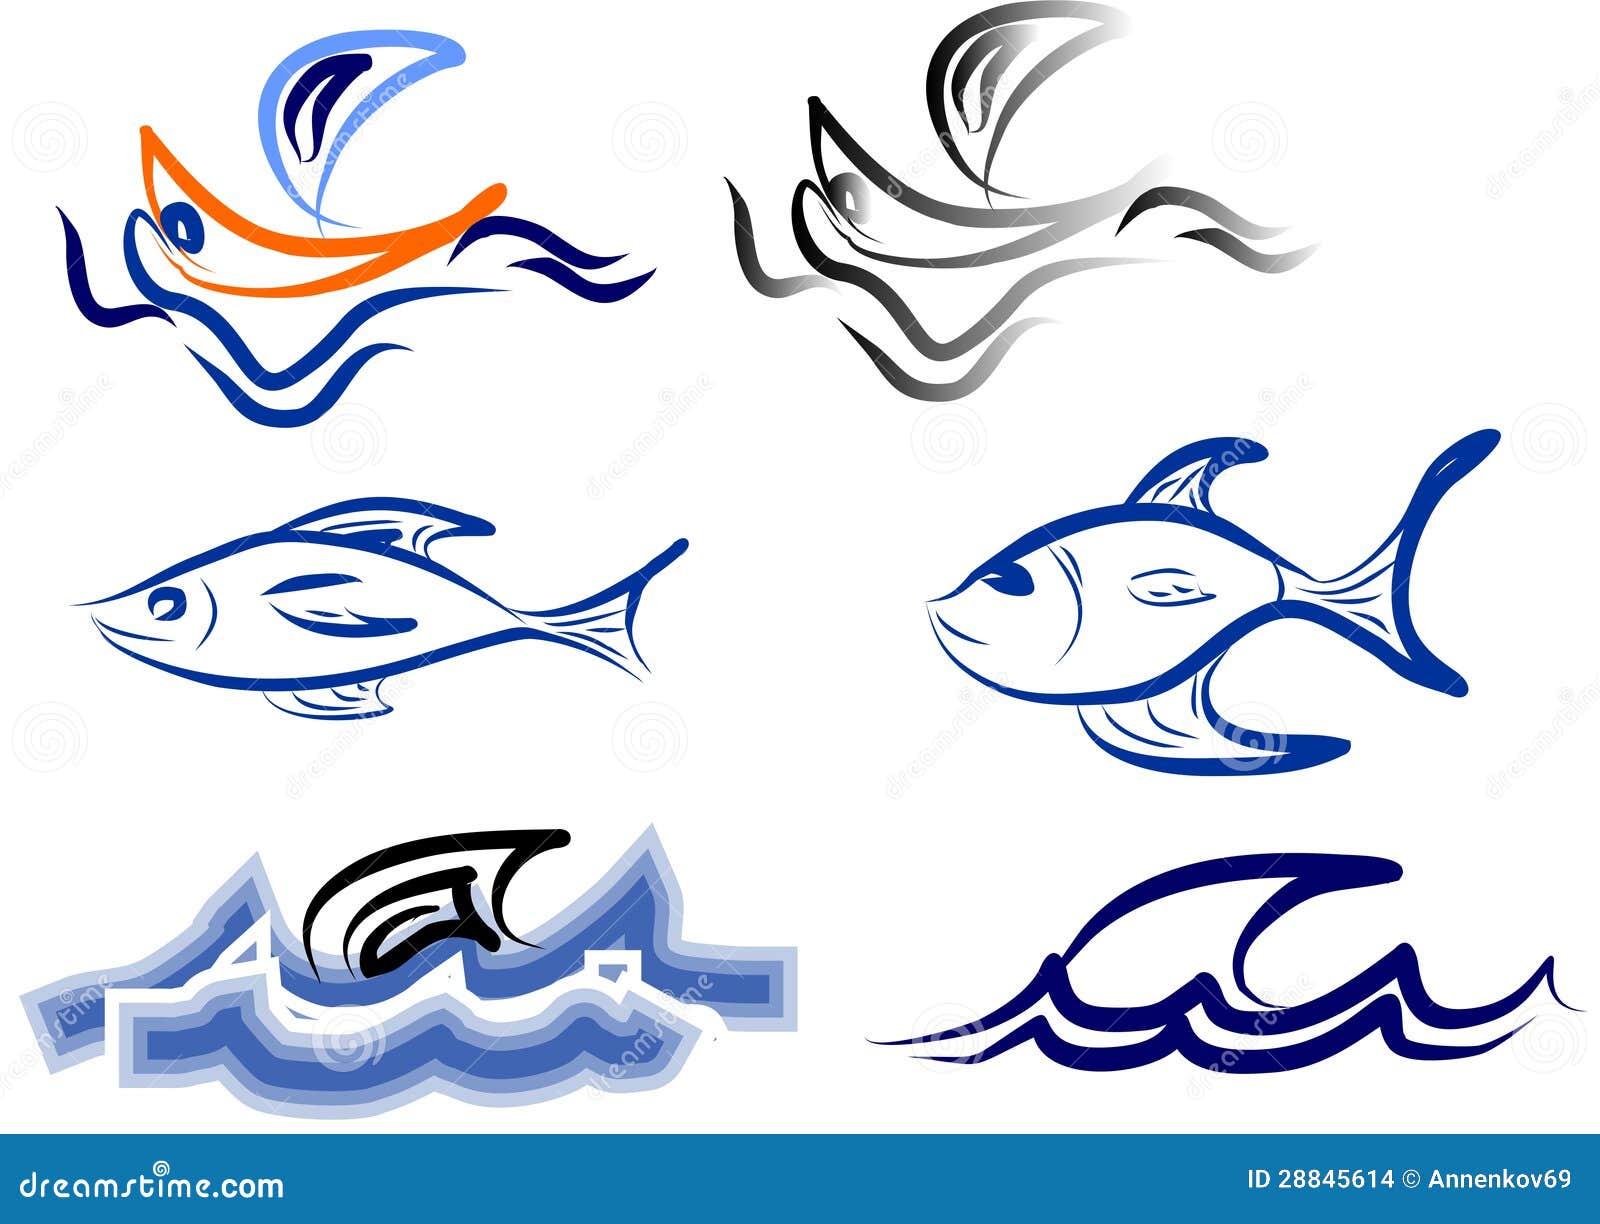 Logo Boat And Fish Stock Images - Image: 28845614